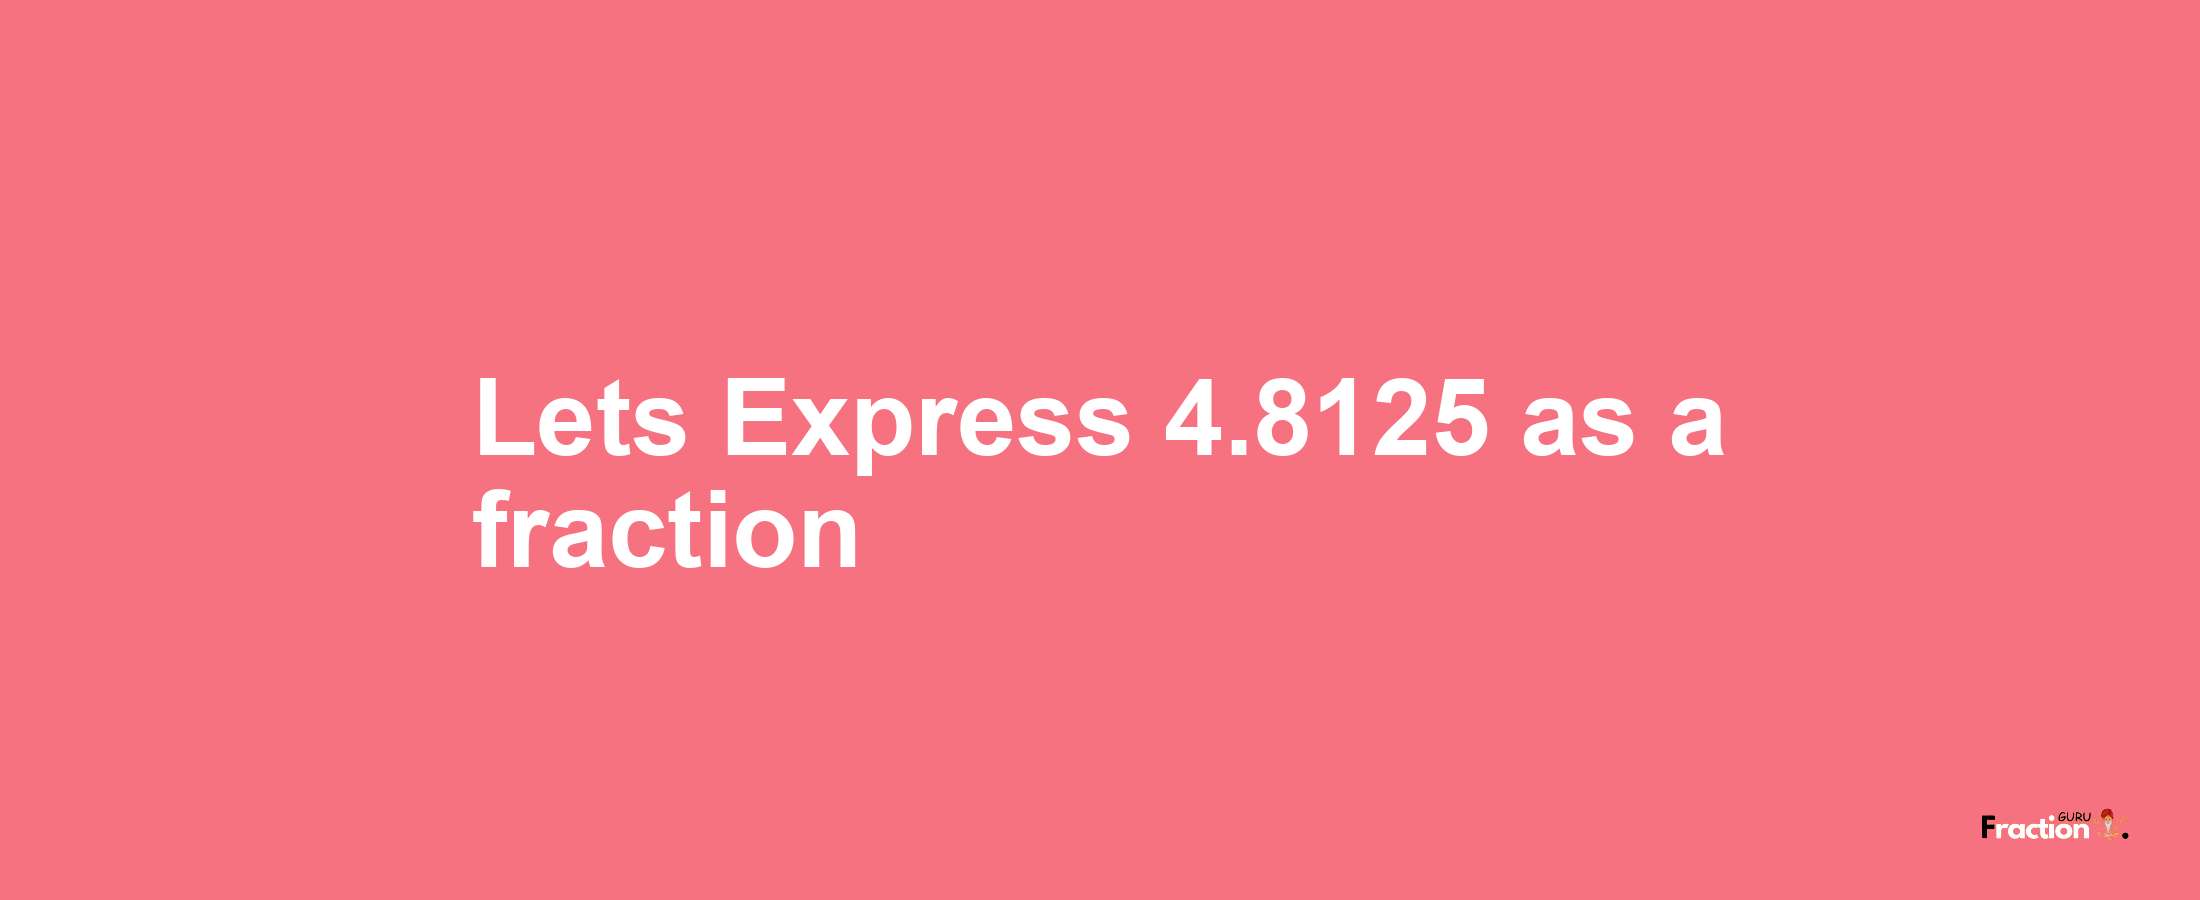 Lets Express 4.8125 as afraction